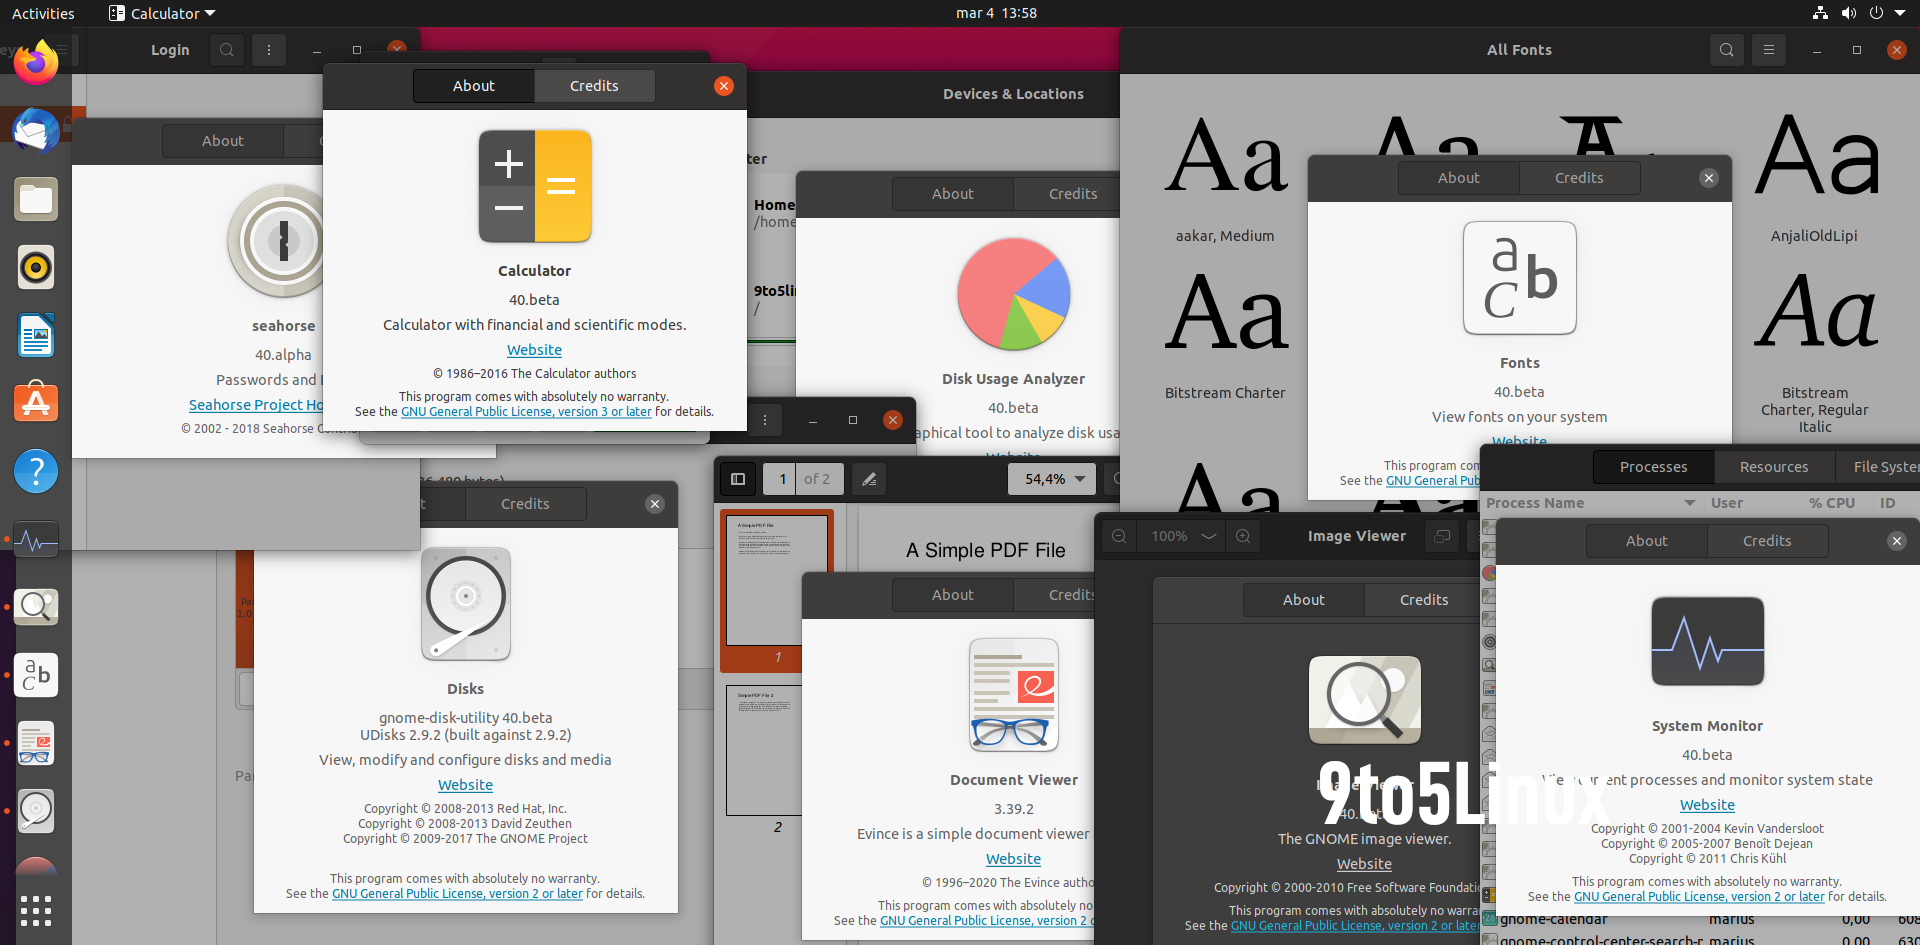 Looks Like Ubuntu 21.04 Will Offer a Hybrid GNOME 3.38 Desktop with GNOME 40 Apps